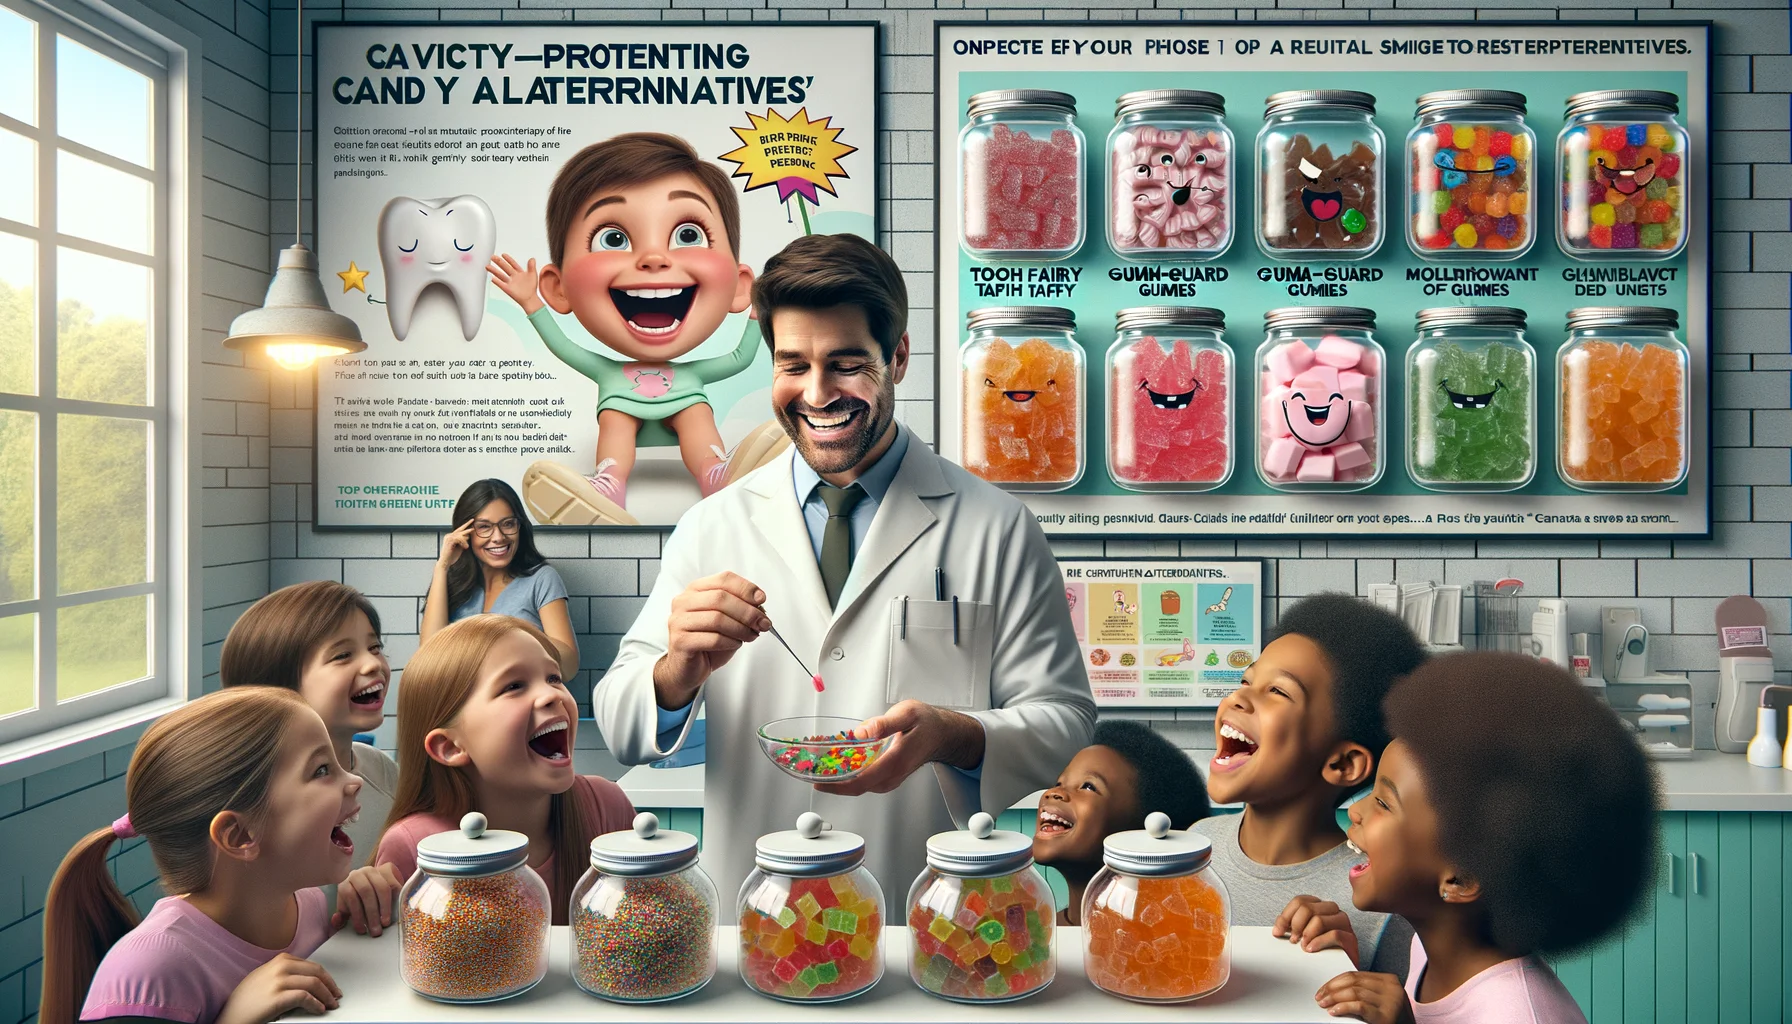 Create an amusing image that realistically depicts the ideal scenario for cavity-preventing candy alternatives. Imagine a dentist's office with a smiling dentist endorsing a range of colorful, attractive candies displayed in glass jars, each labeled with amusing names like 'Tooth Fairy Taffy', 'Gum-guard Gummies', and 'Molar Mints'. A group of children, ethnically diverse, are eagerly trying the candies with joyful expressions. Also, incorporate a funny yet informative poster on the wall explaining the benefits of these alternatives compared to regular sweets. The mood should be positive and light-hearted.